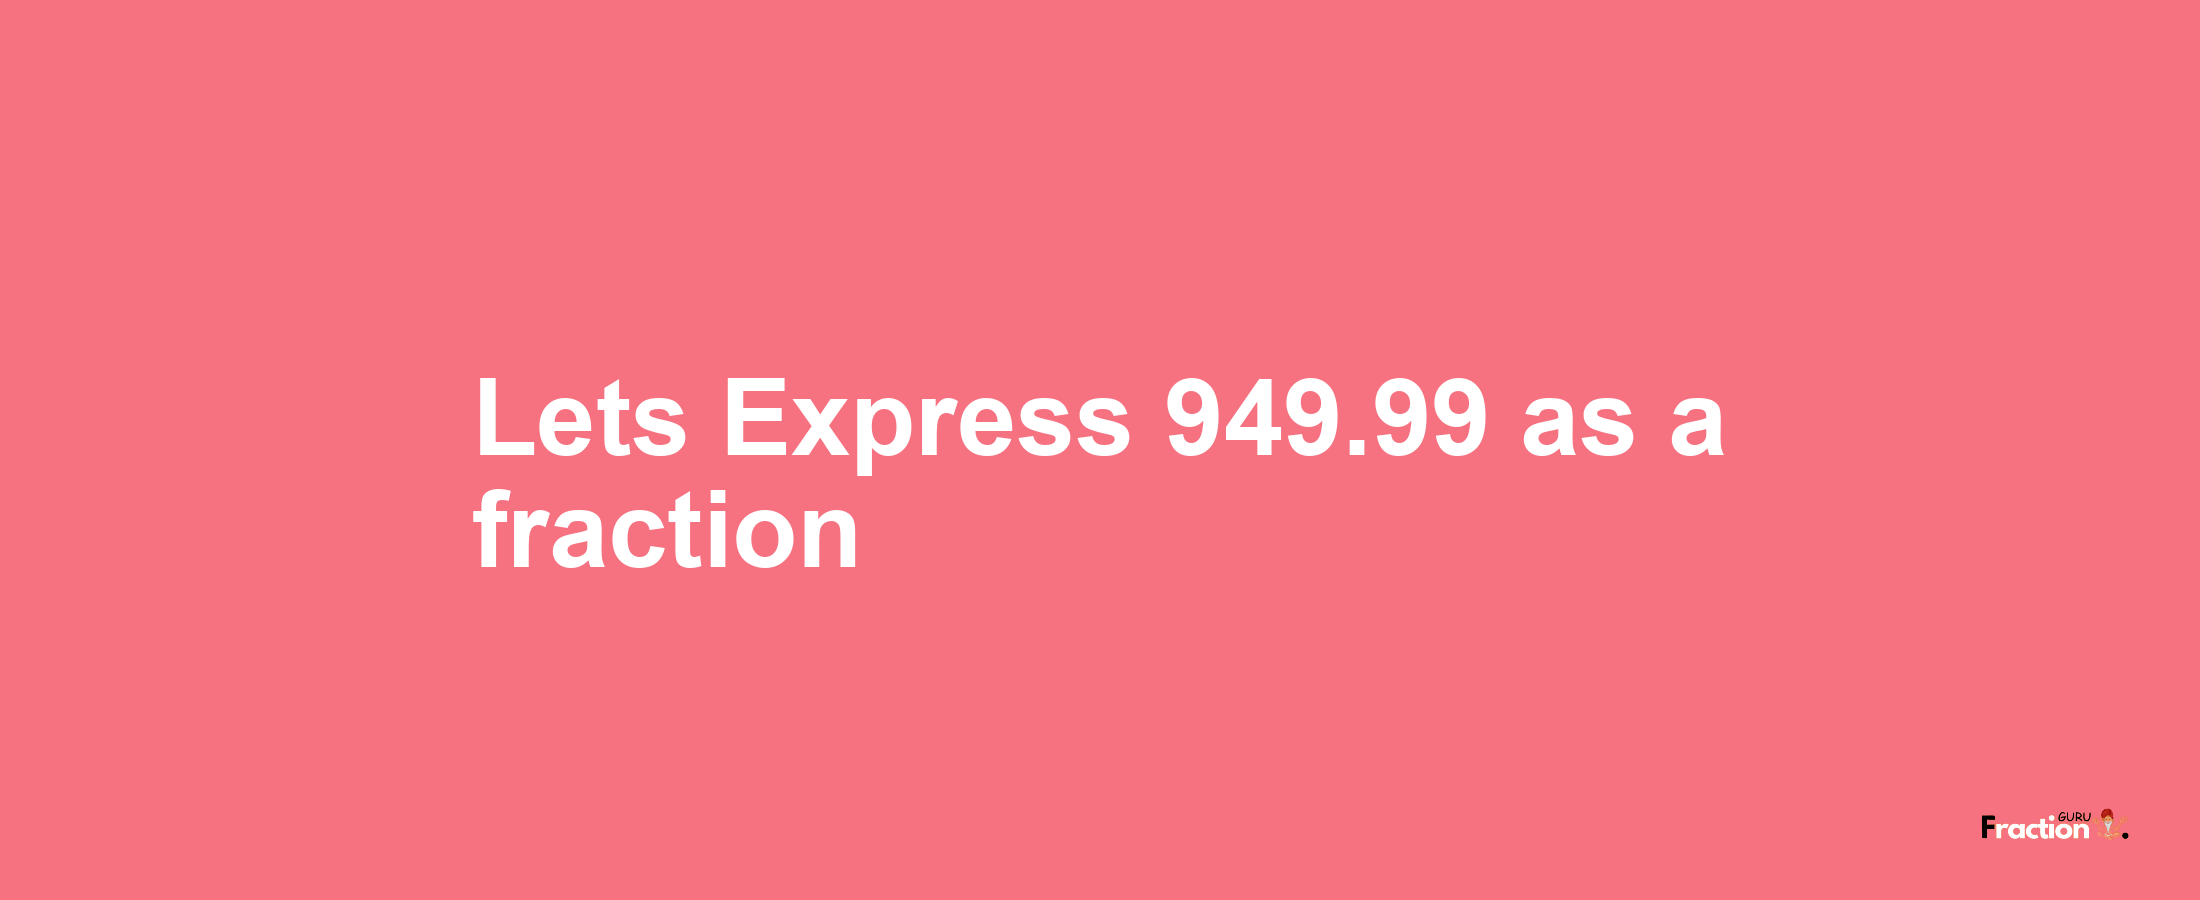 Lets Express 949.99 as afraction